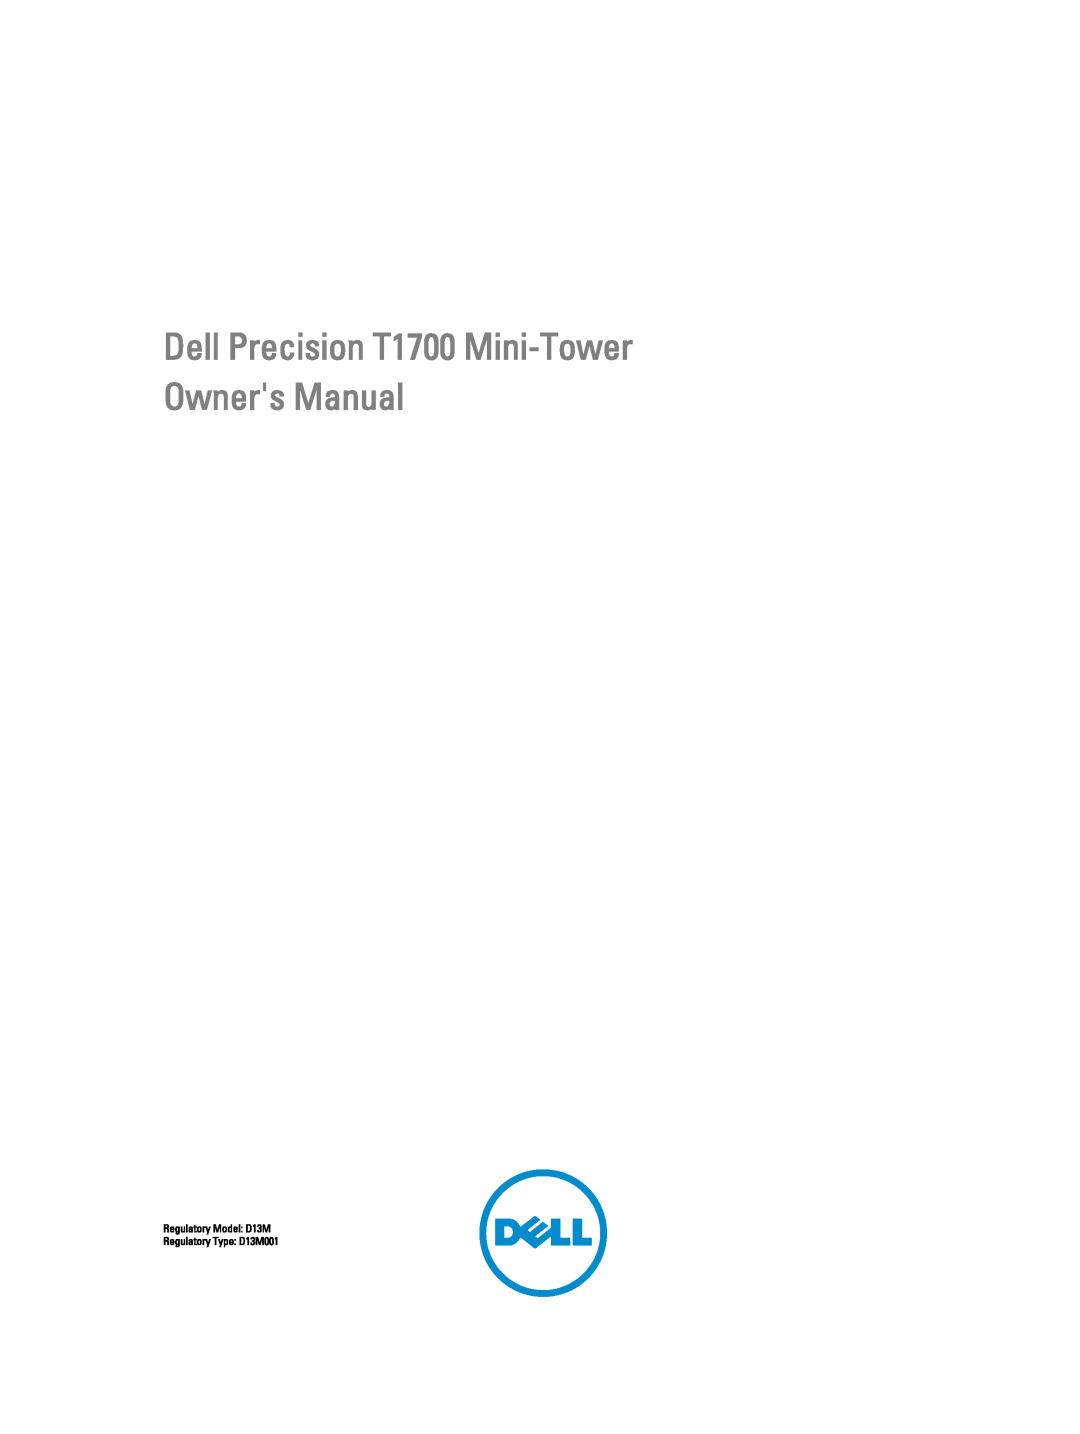 Dell owner manual Dell Precision T1700 Small Form Factor Owners Manual, Regulatory Model D07S Regulatory Type D07S001 